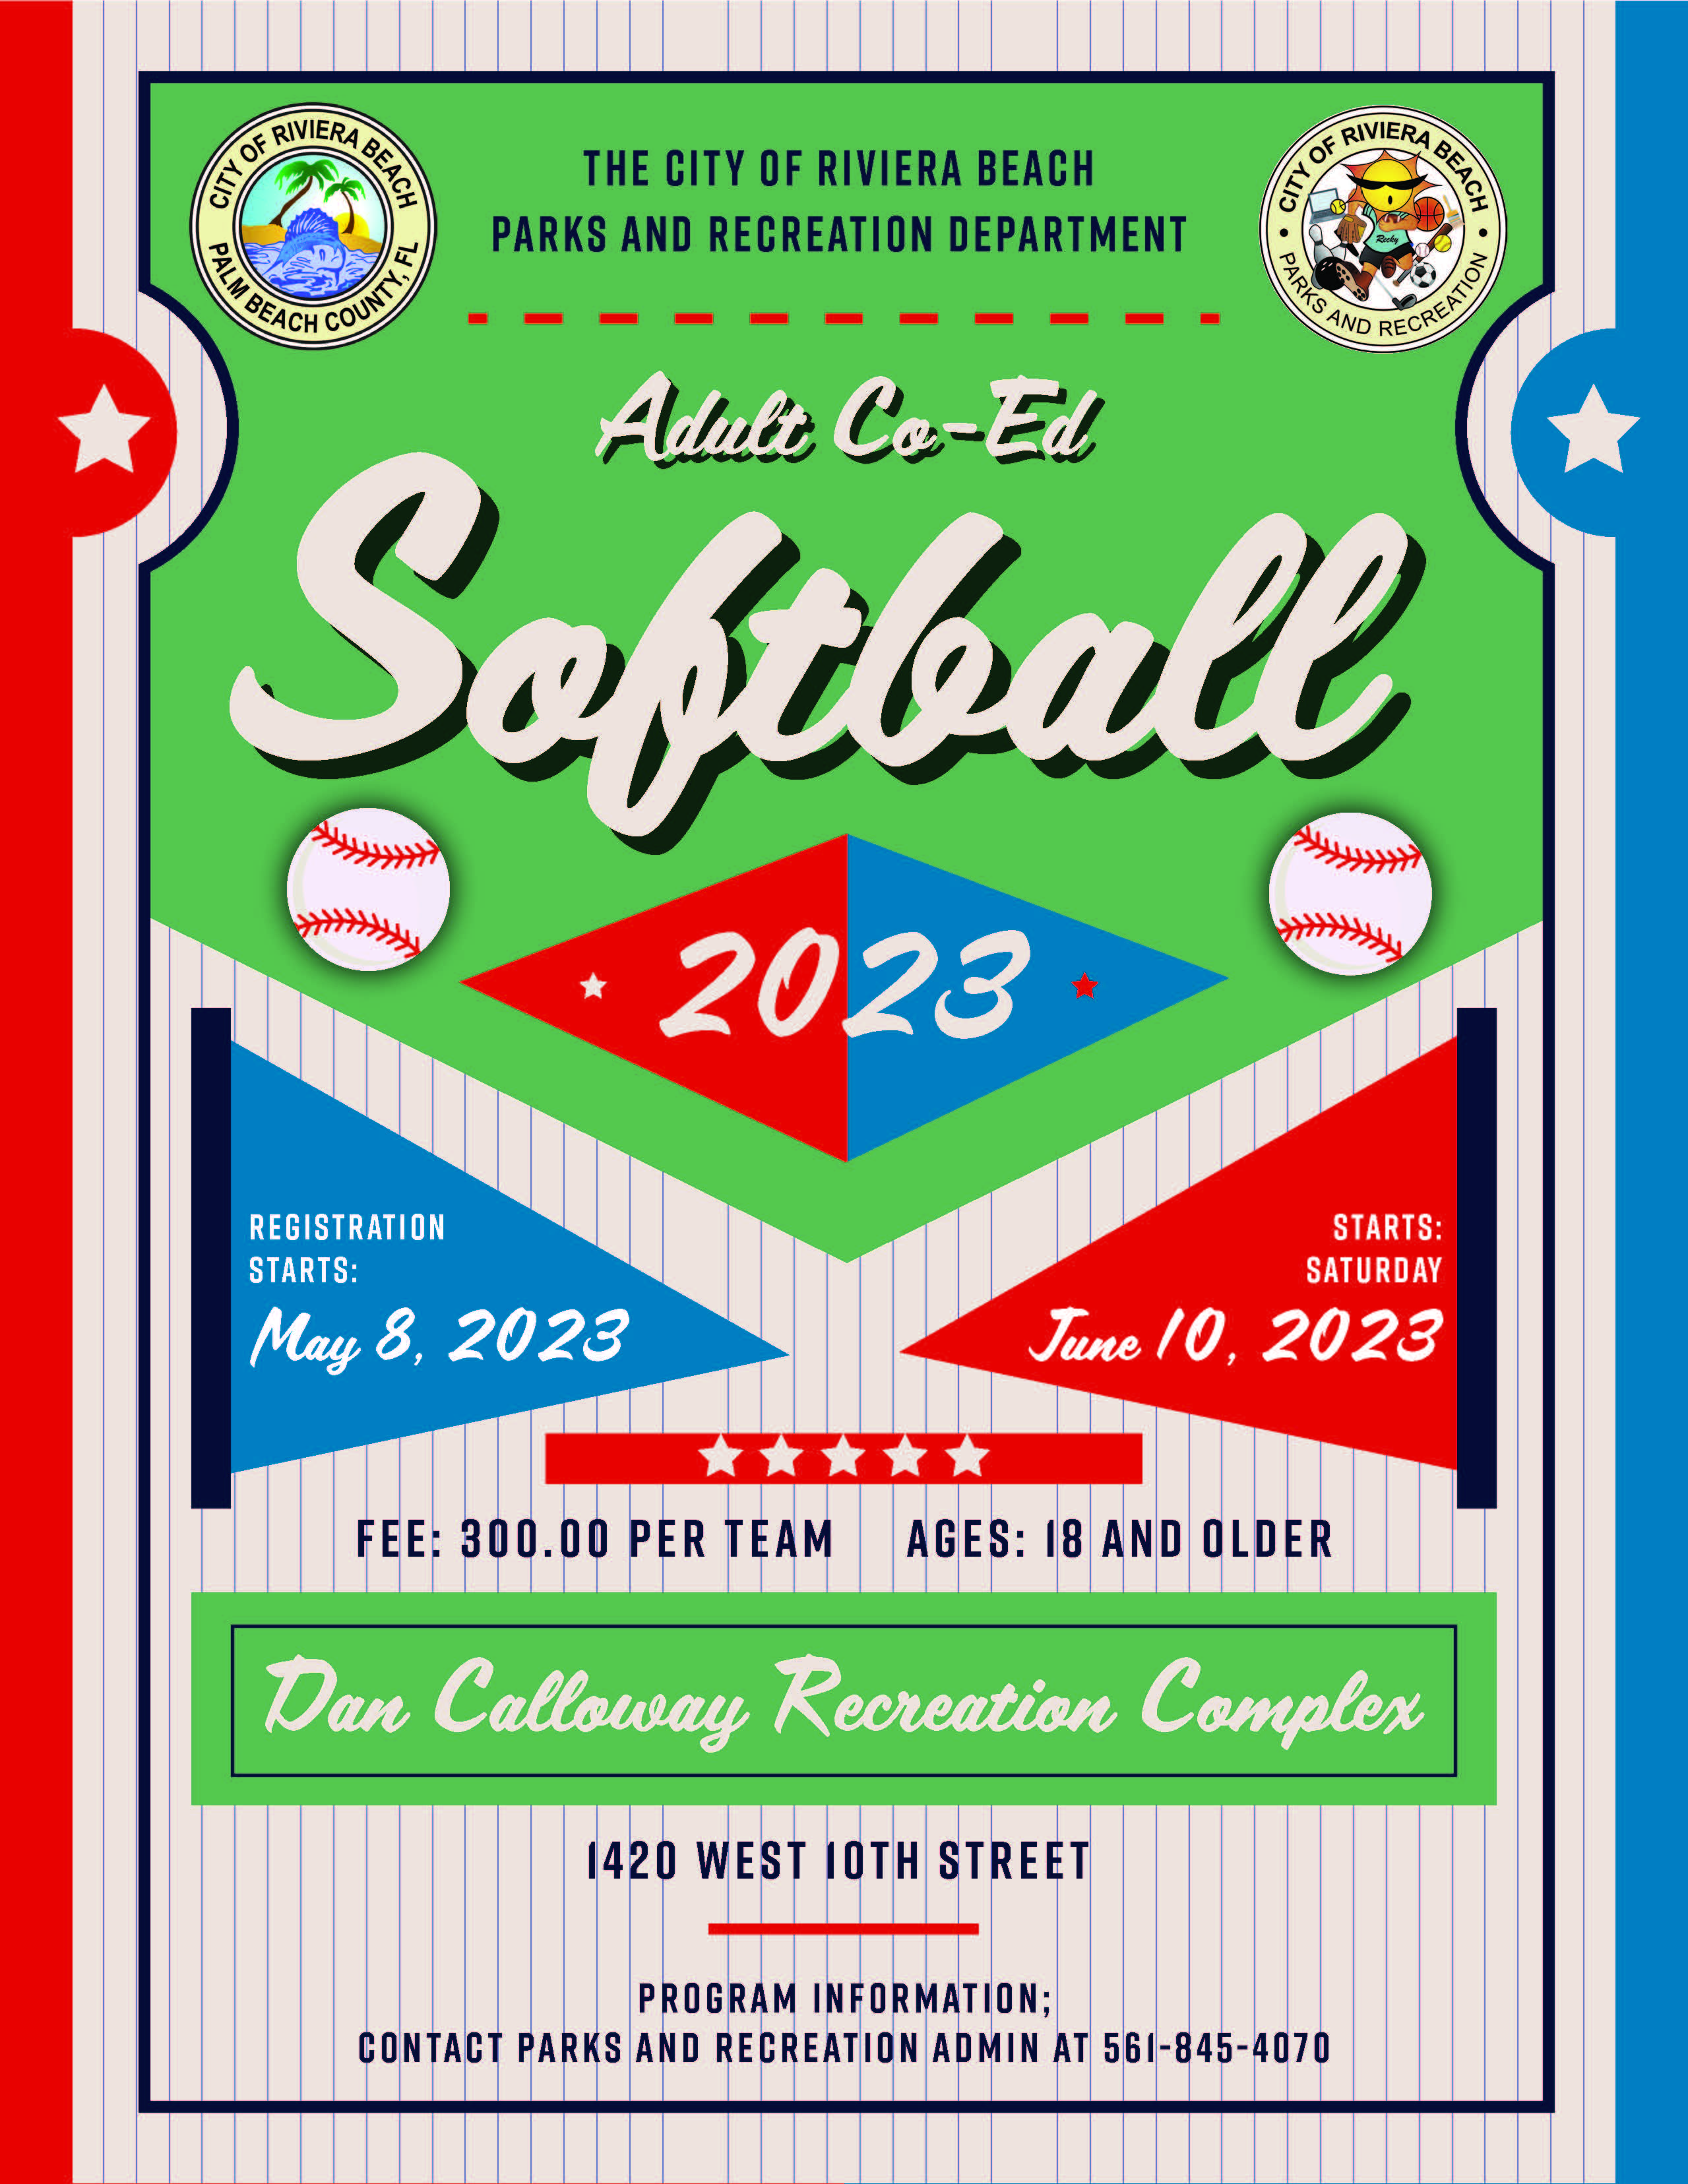 Adult Co-Ed Softball May 8th- June 10th